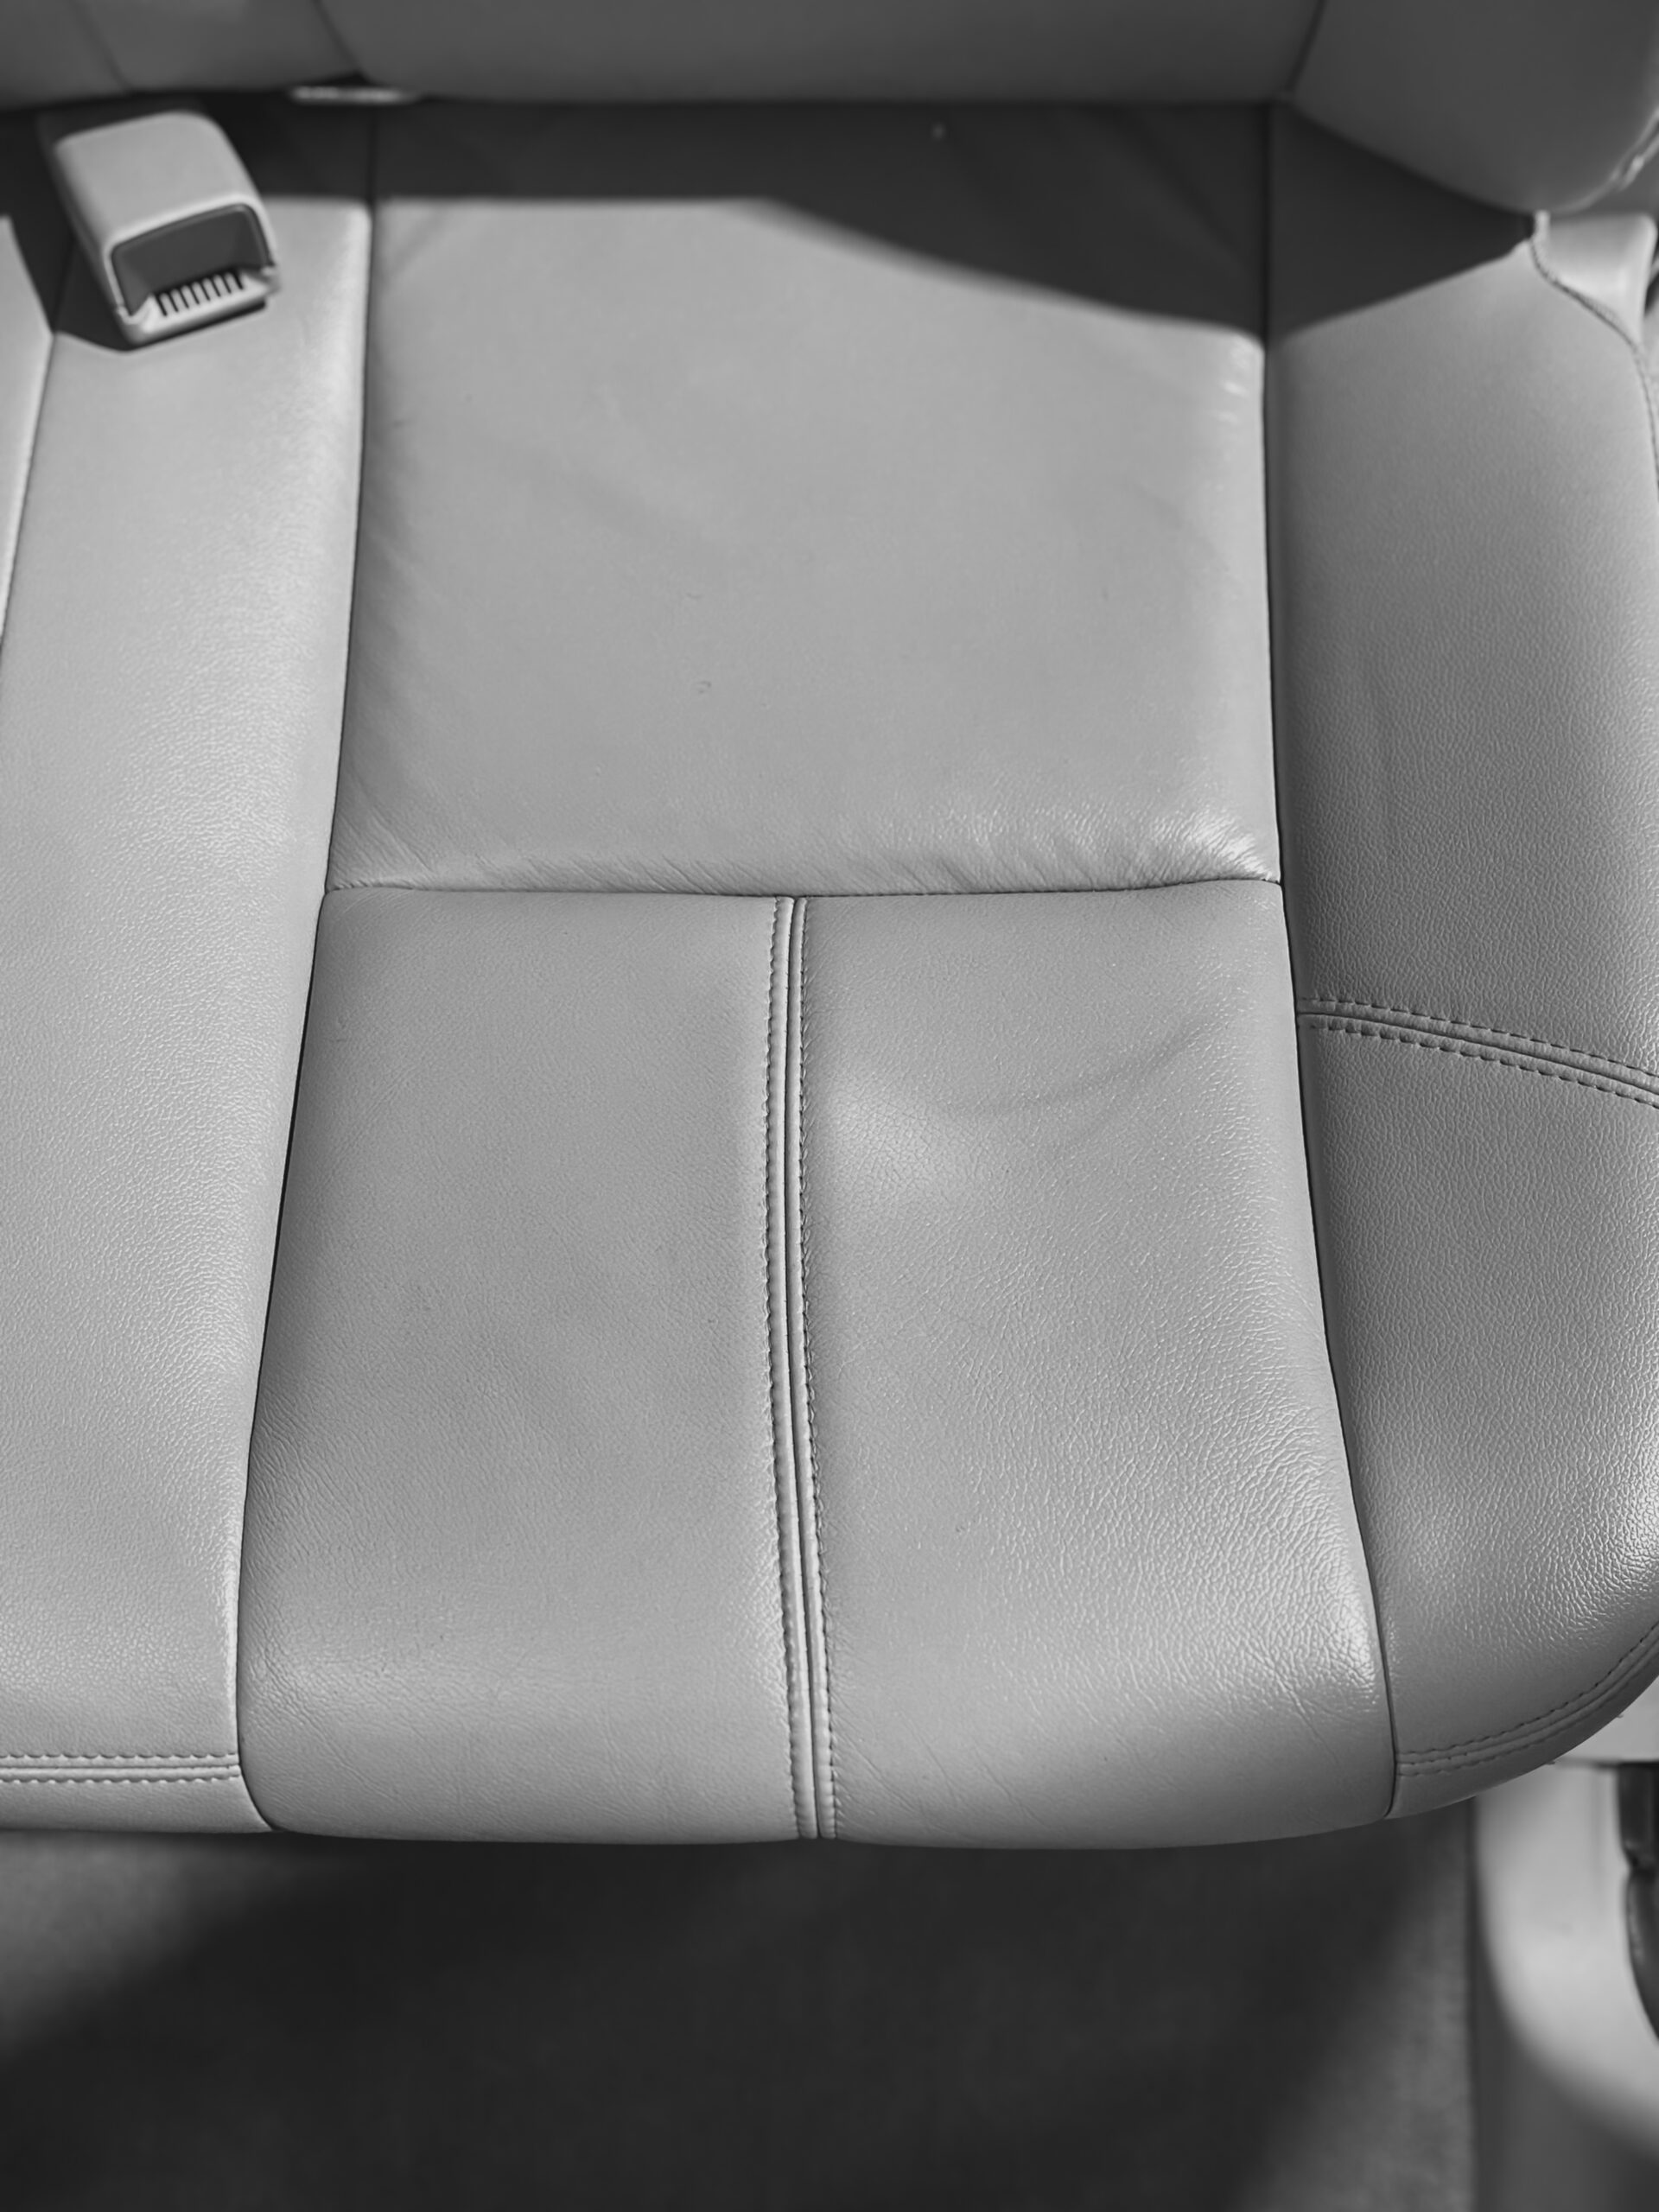 leather cleaning, leather upholstery, professional, auto detailer